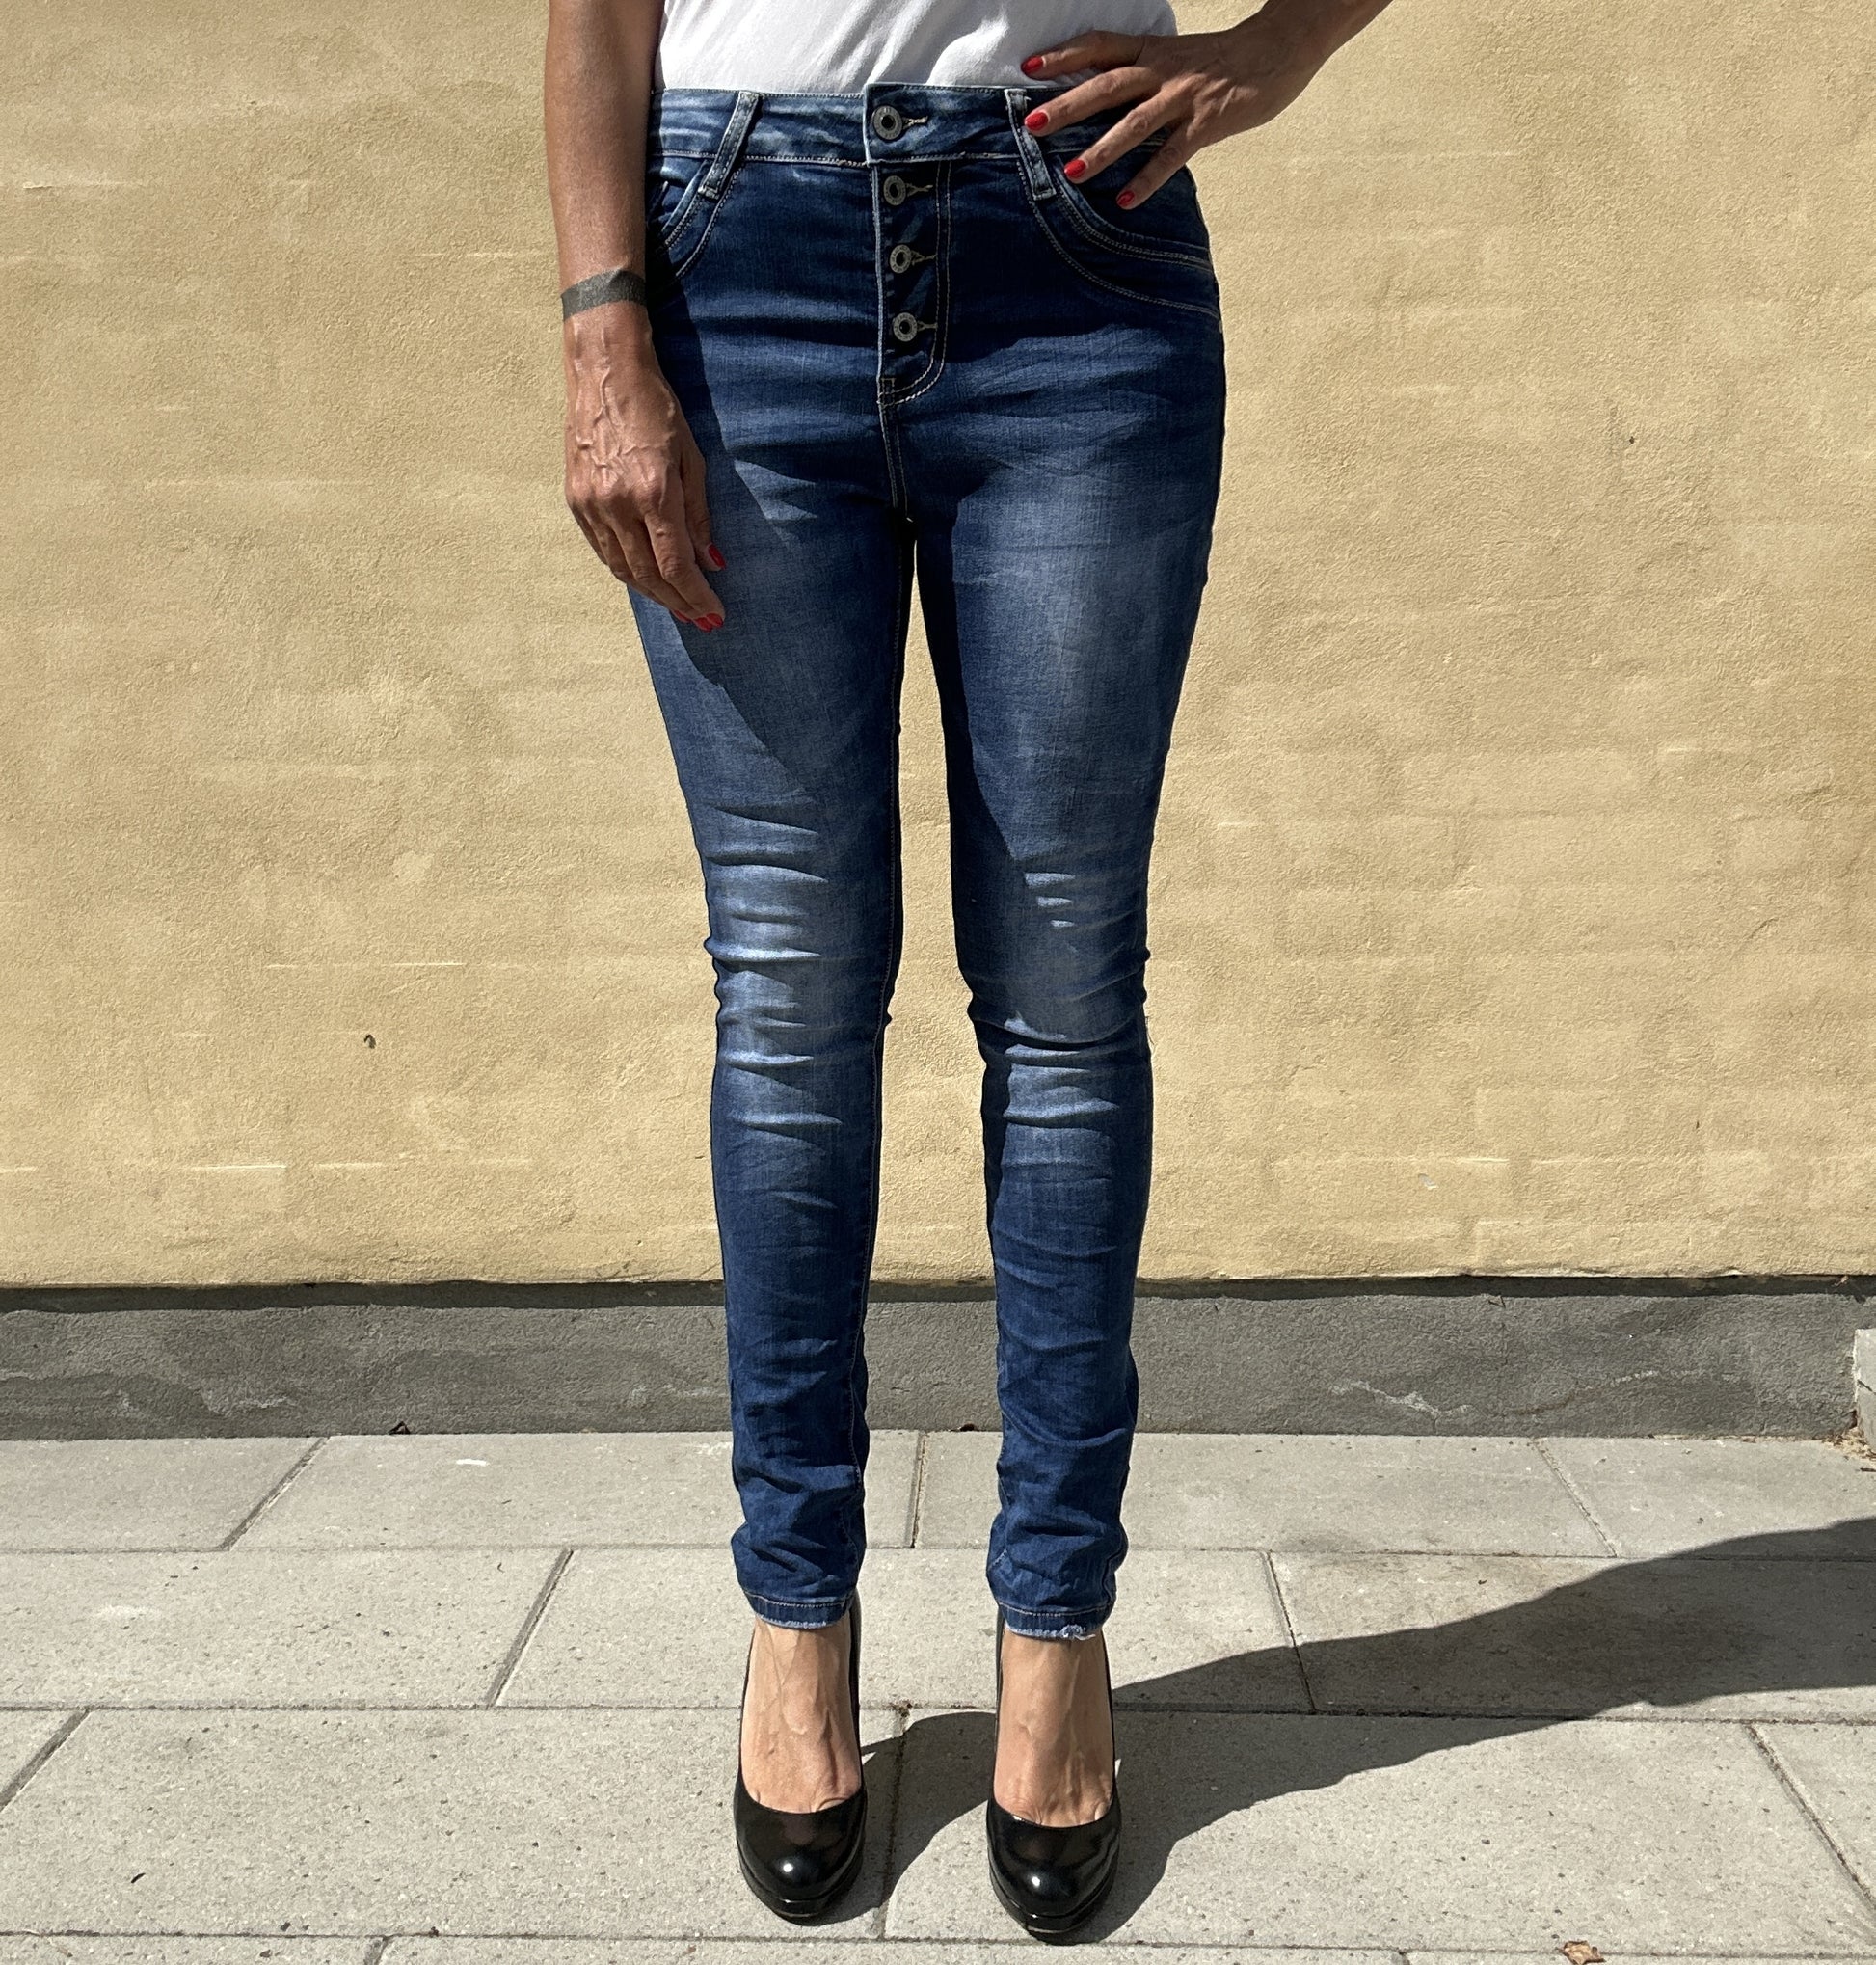 Jewelly Jeans 22200 MID BLUE WASH